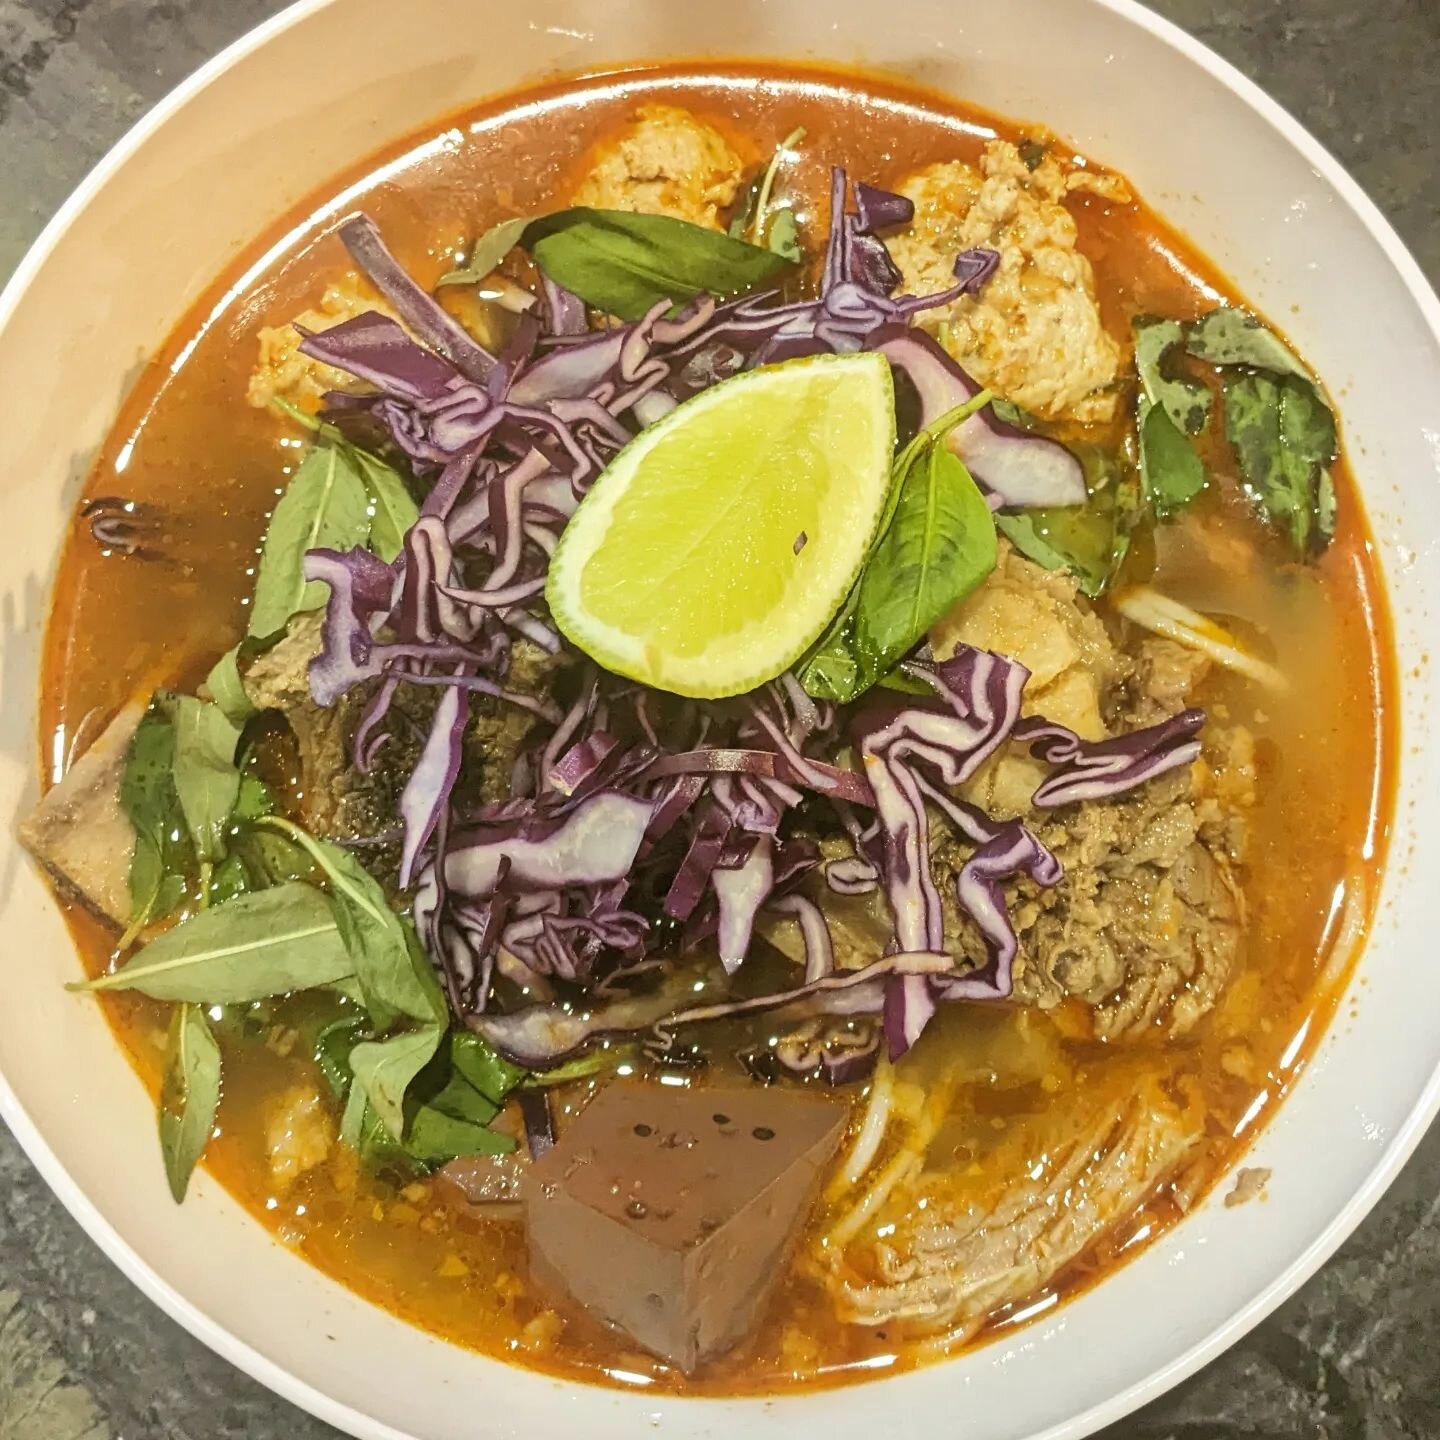 B&uacute;n B&ograve; Huế - Spicy beef noodle soup
with homemade bouncy chả lụa meatballs, brisket, oxtail, pig blood, cabbage, herbs, lime and the signature lemongrass, garlic, shallot and annatto BBH oil on top

Not something my family ever made at 